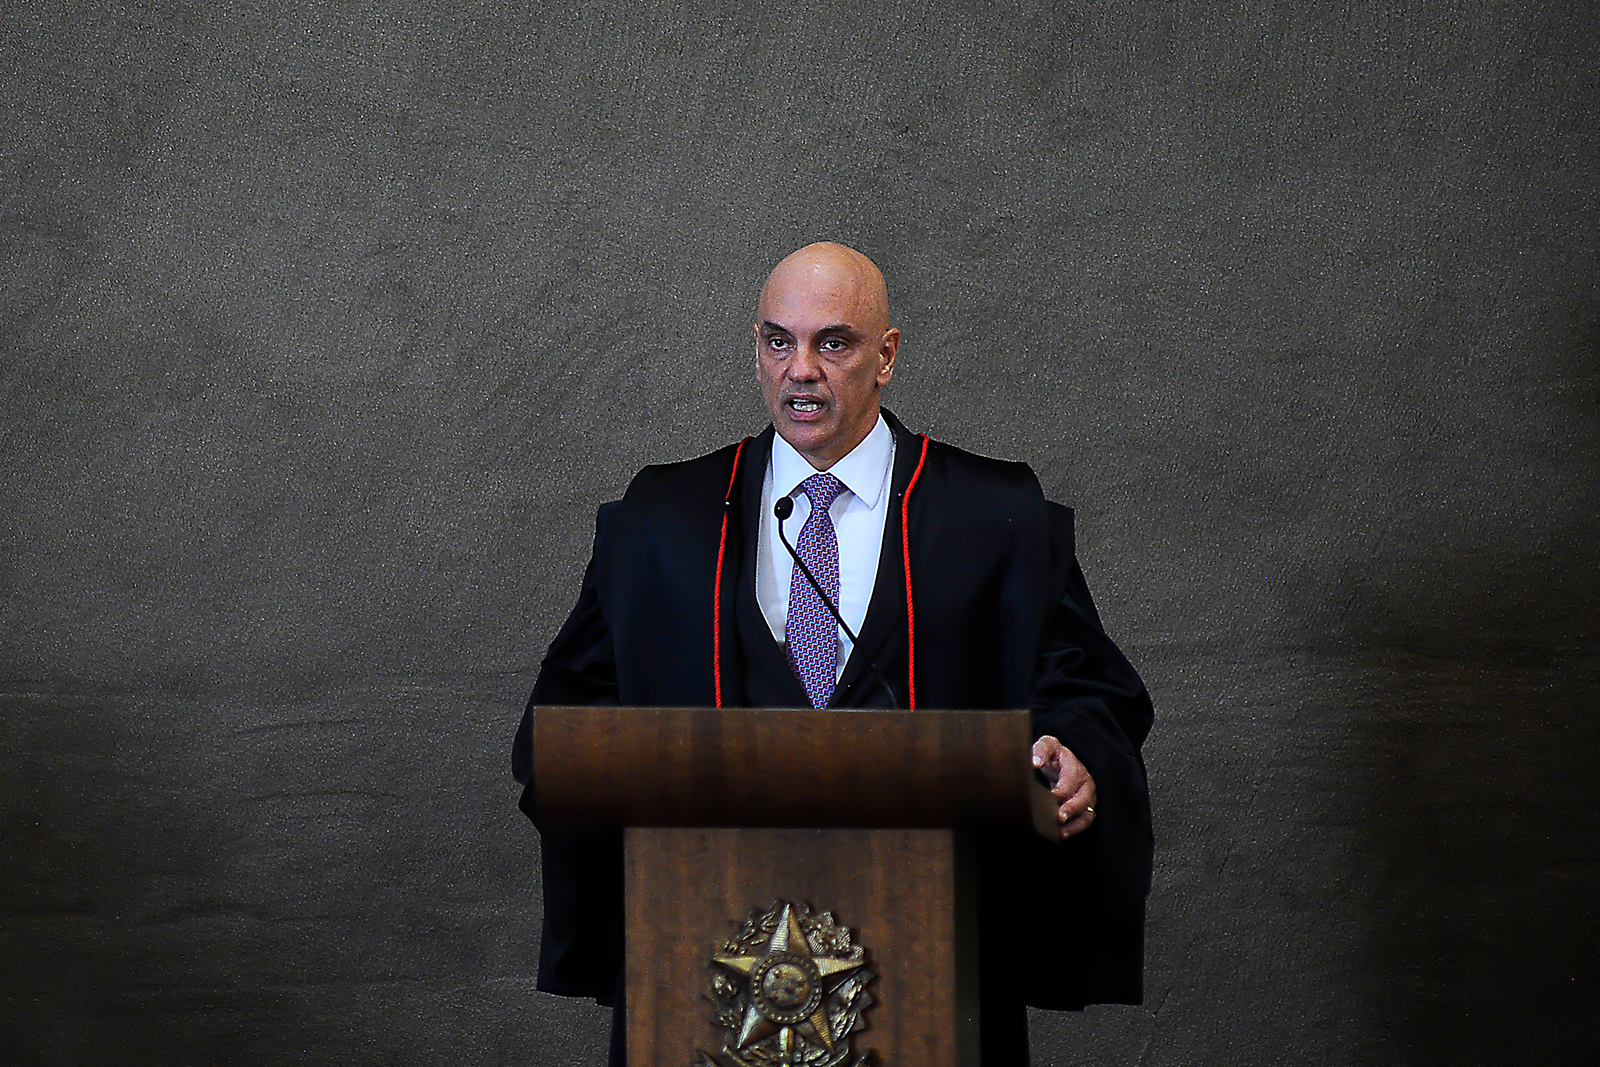 Alexandre de Moraes during a ceremony at the High Electoral Court (TSE) on December 12, 2022.